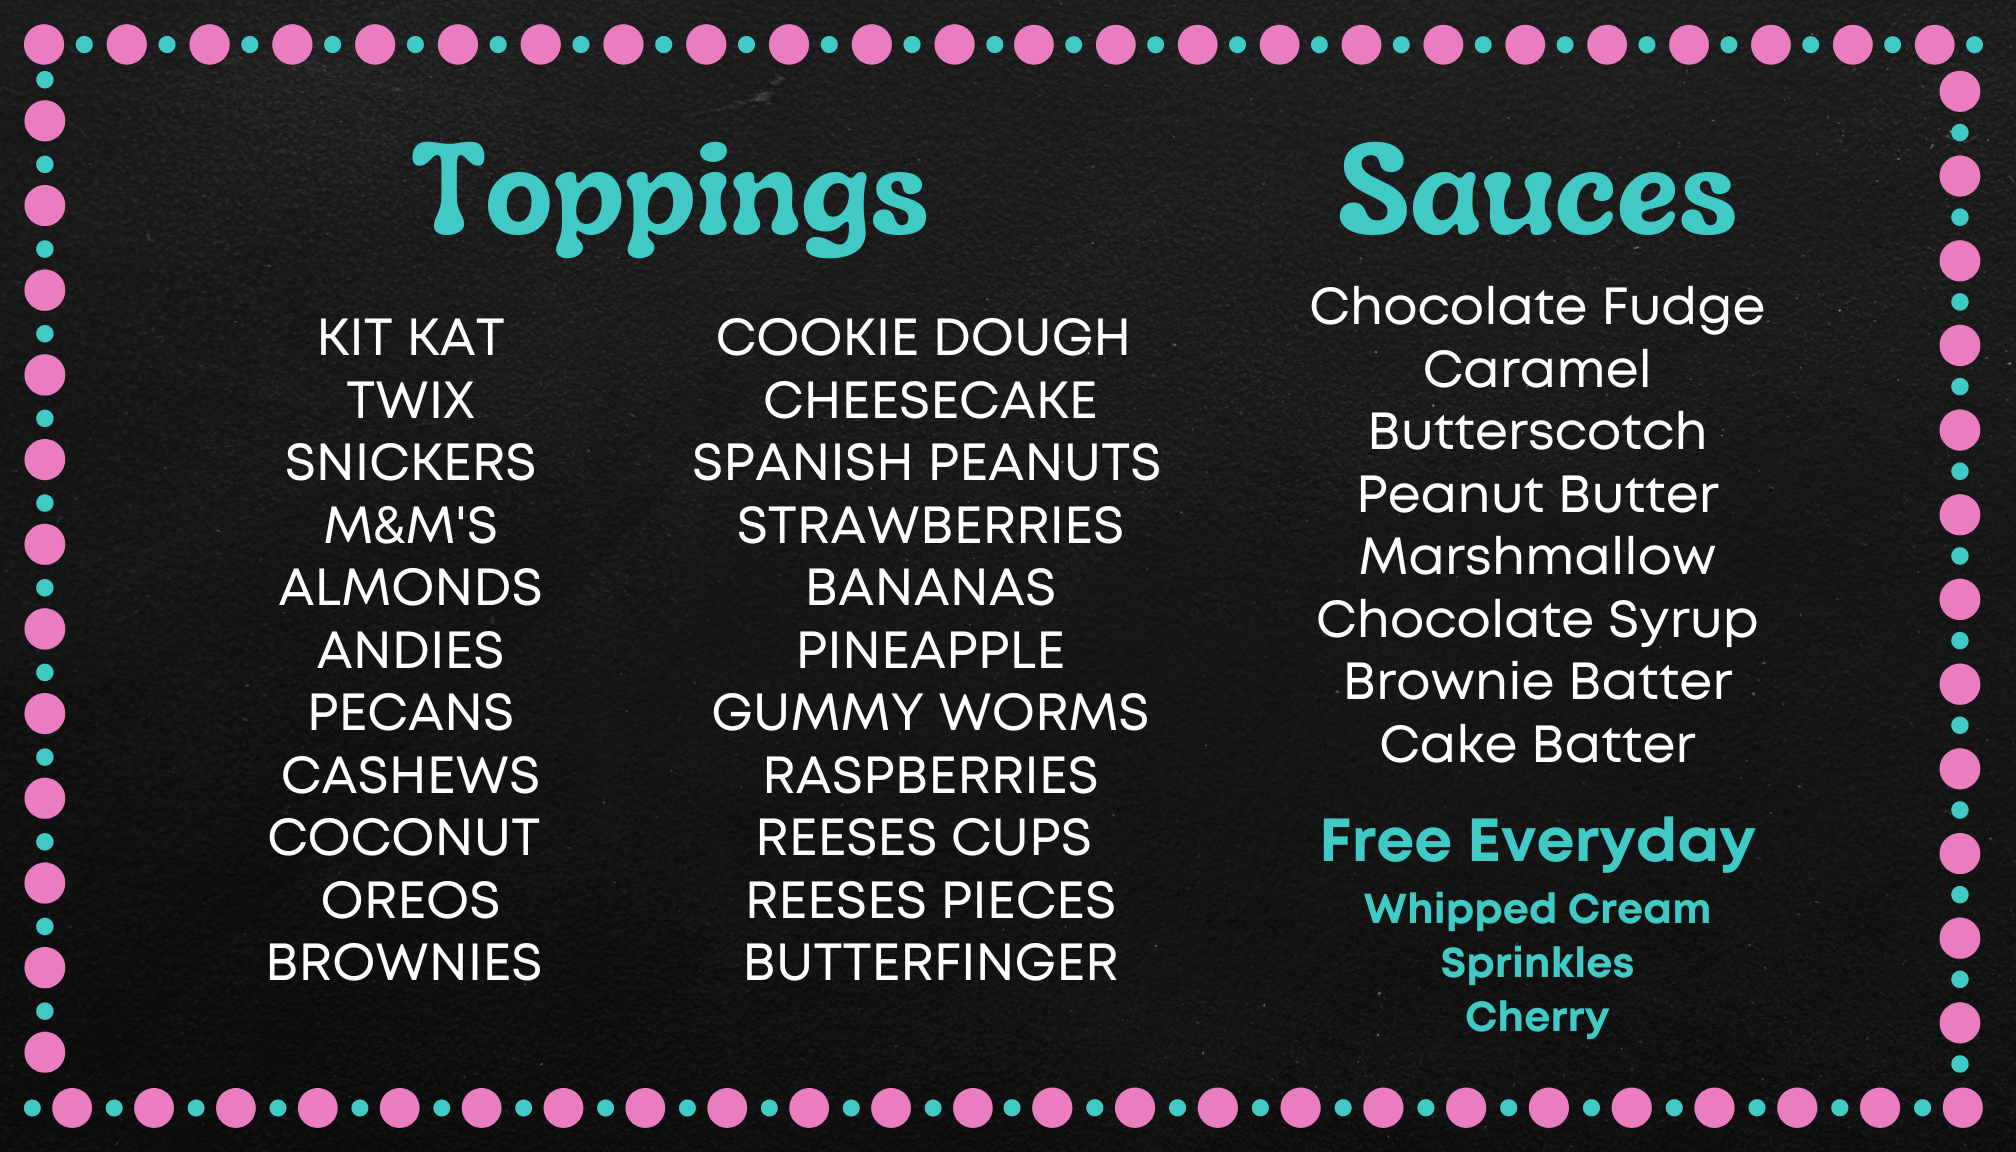 Toppings and Sauces Menu